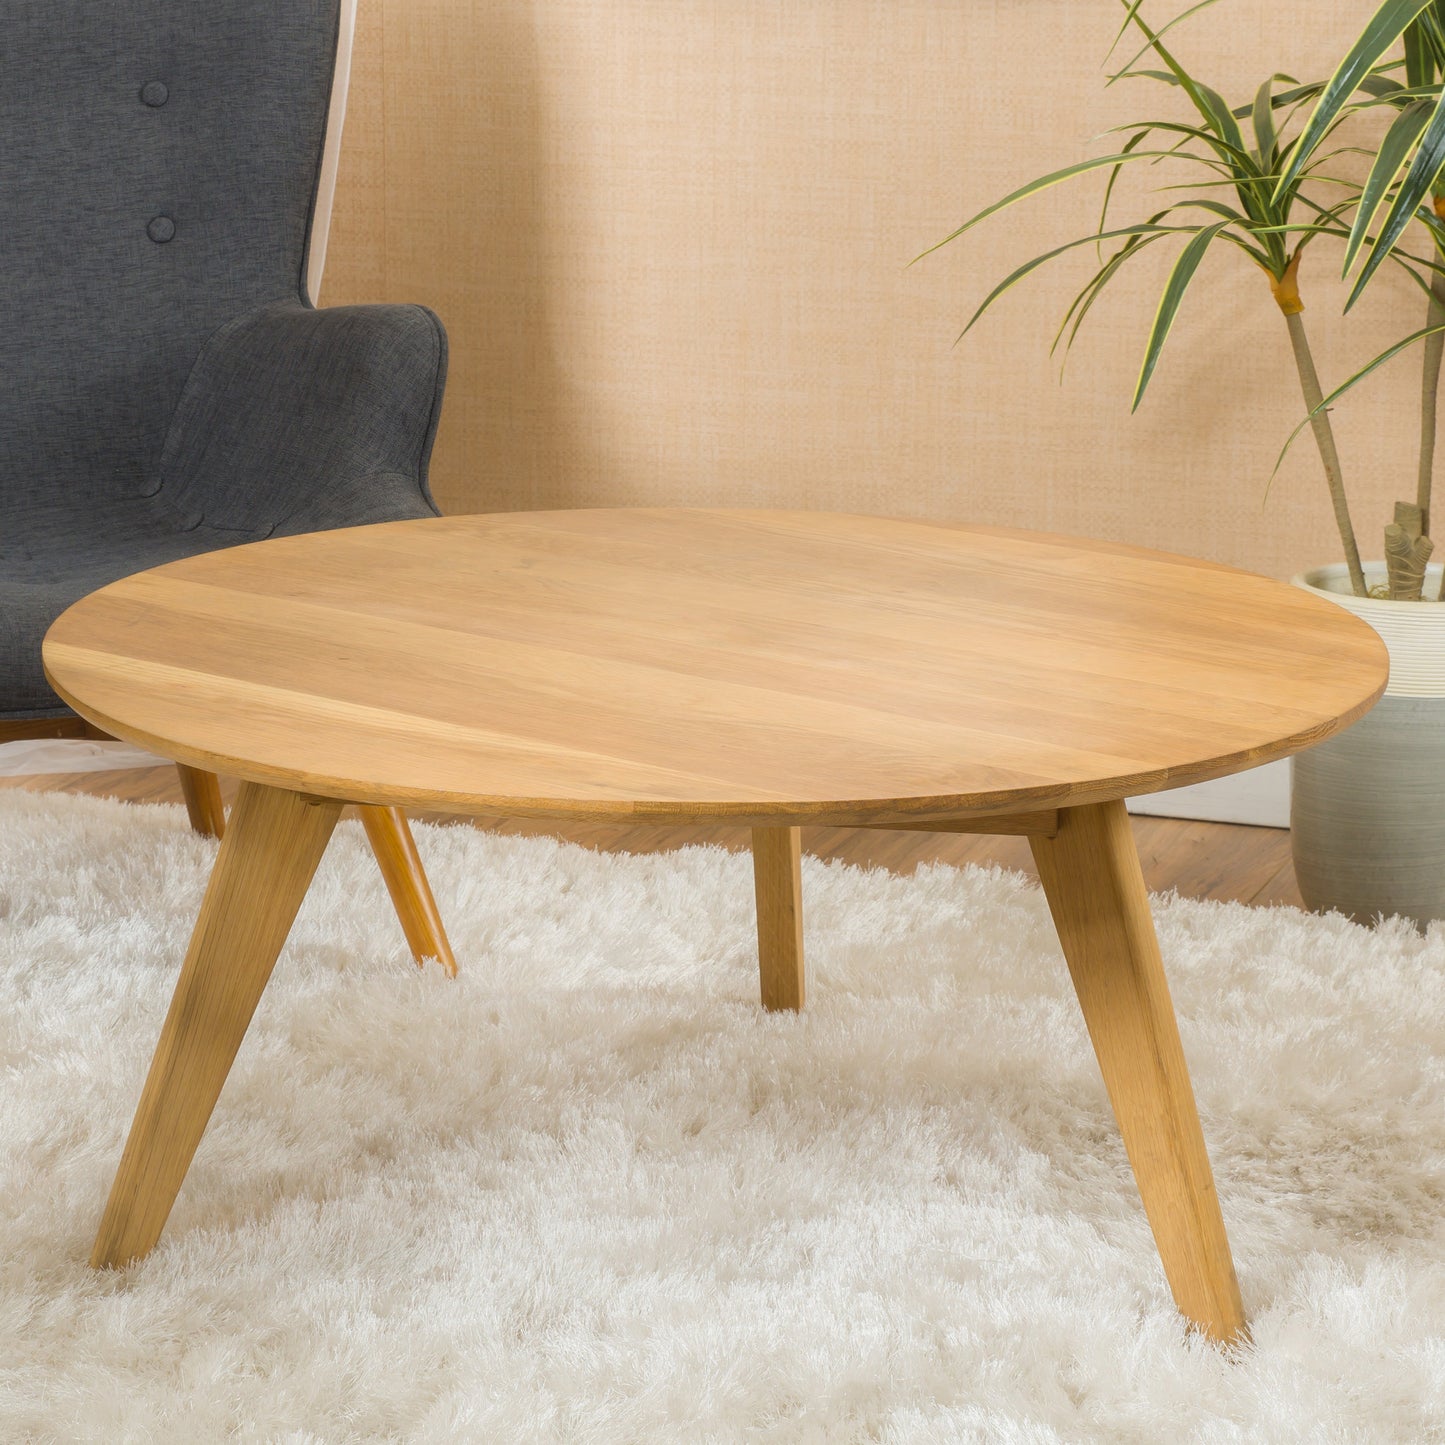 Mimaya Natural Stained Wood Coffee Table